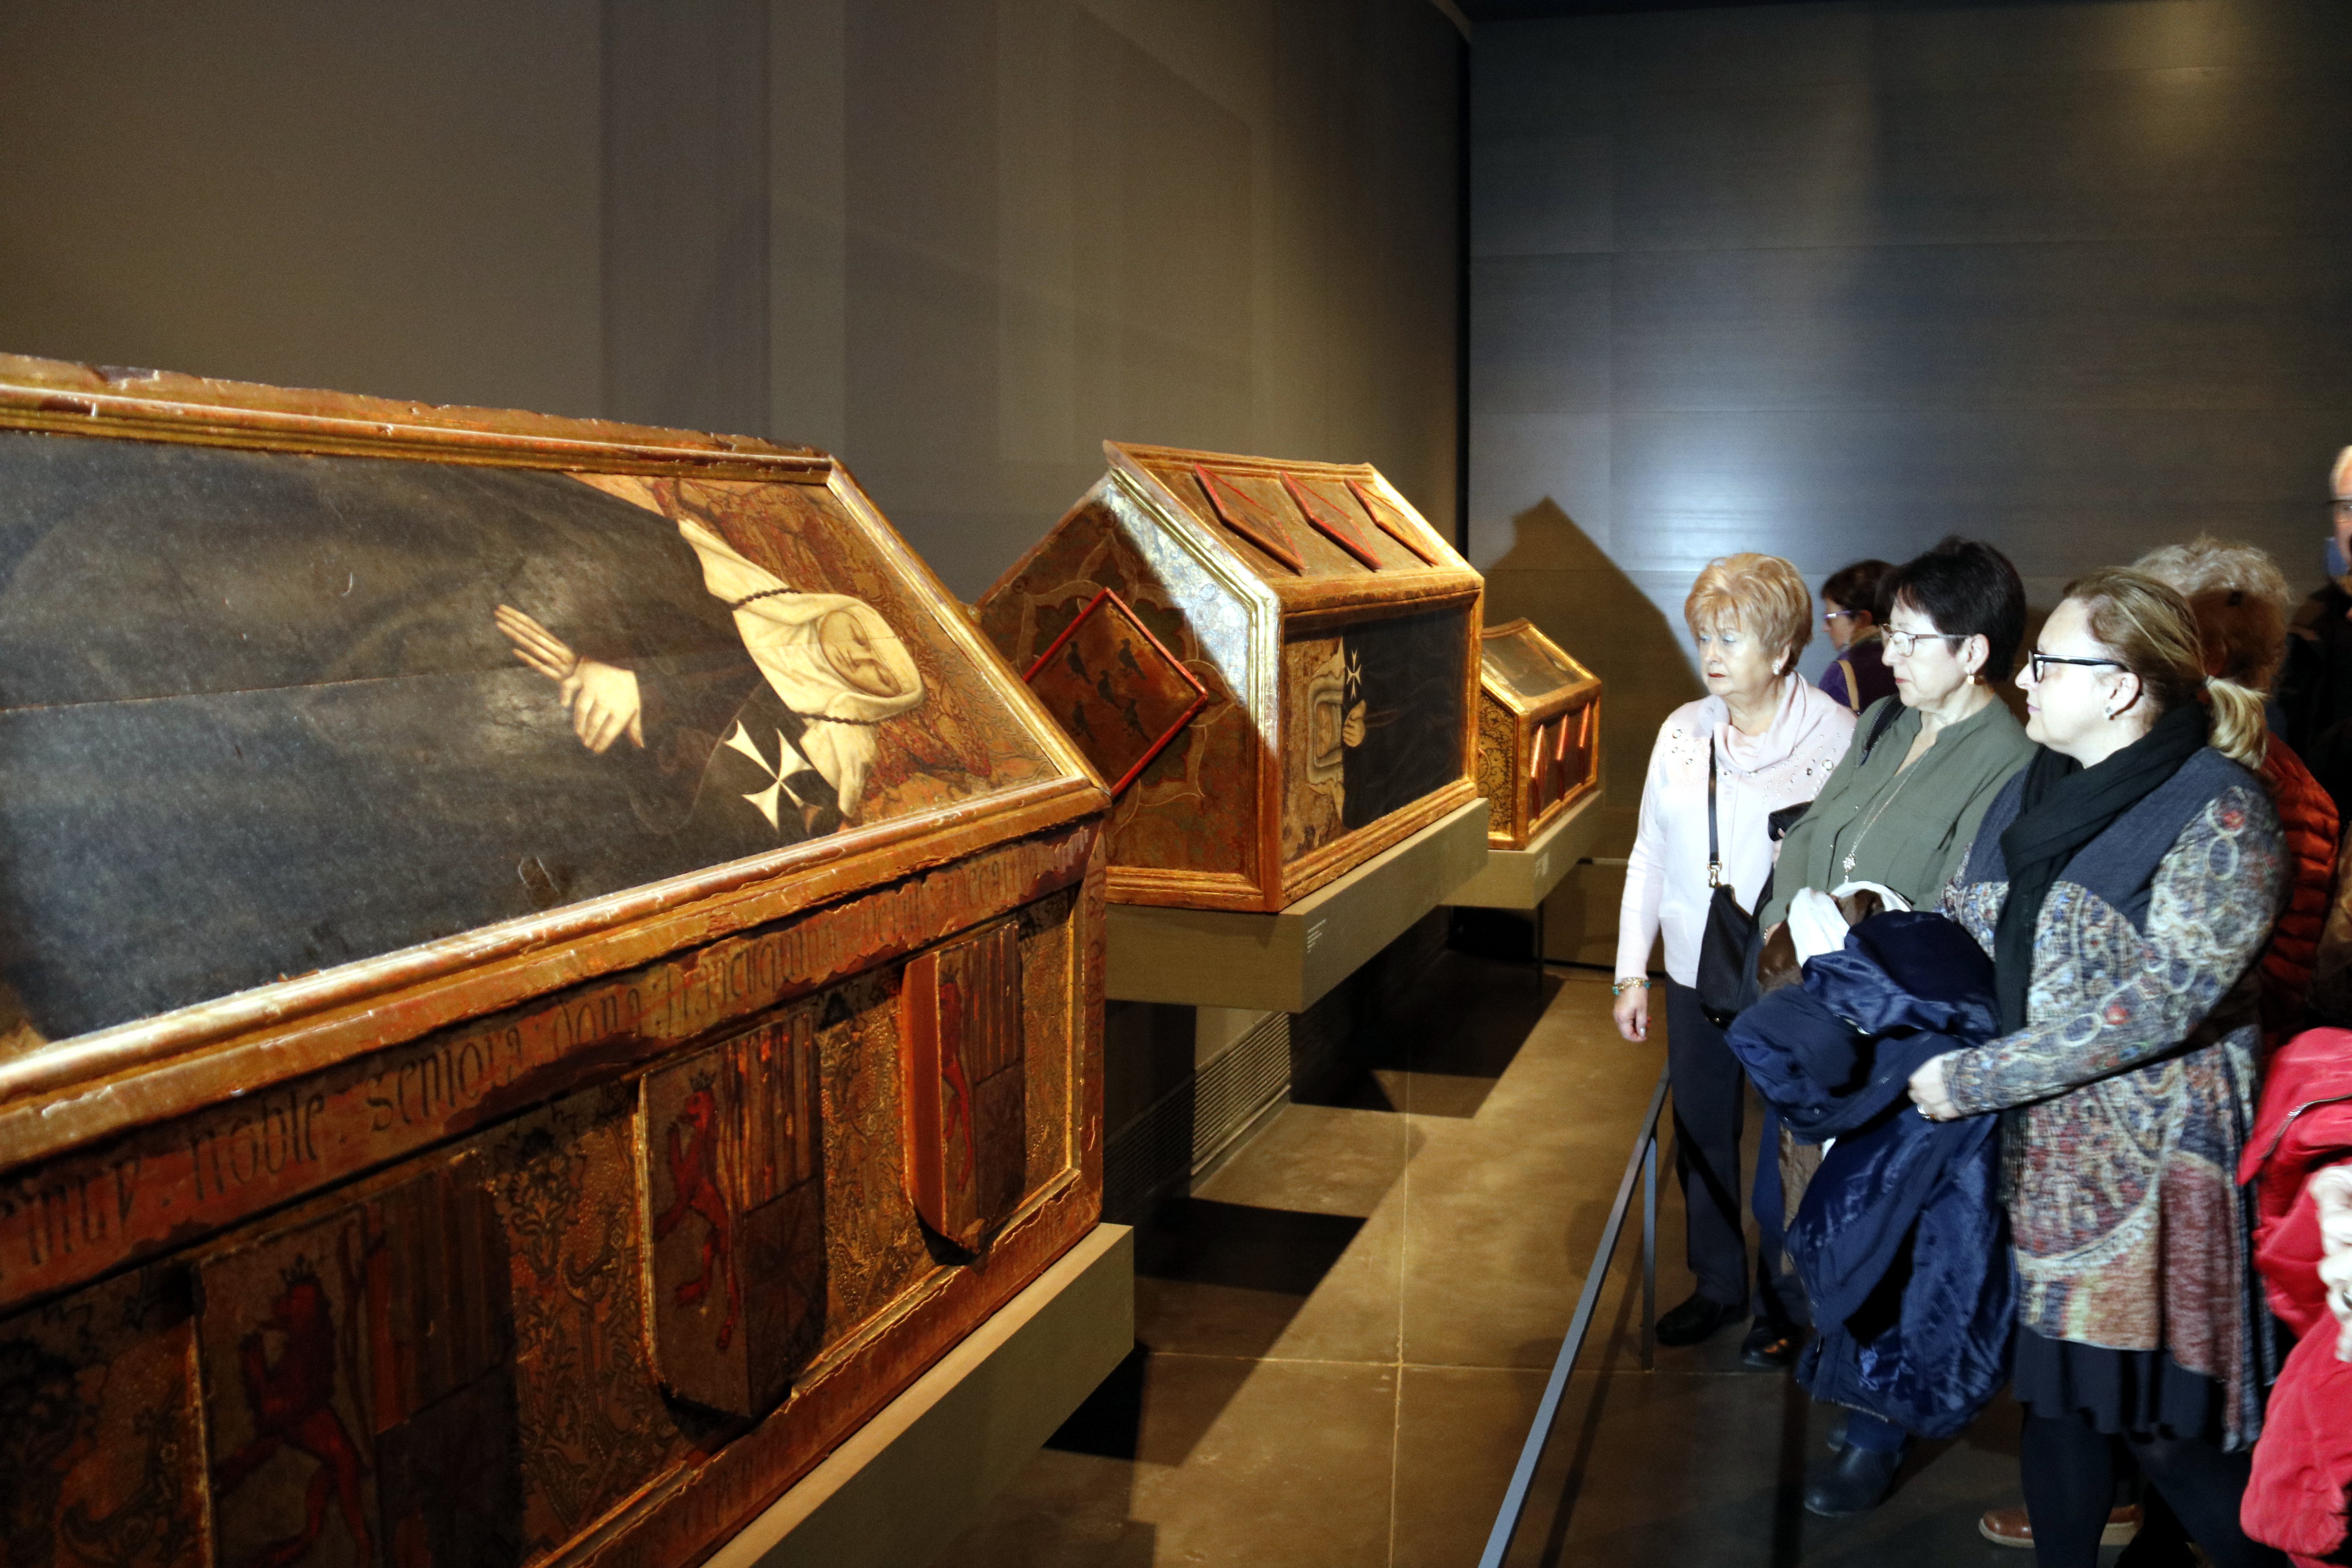 Three monks' sarcophaguses on display in the Museum of Lleida (by ACN)